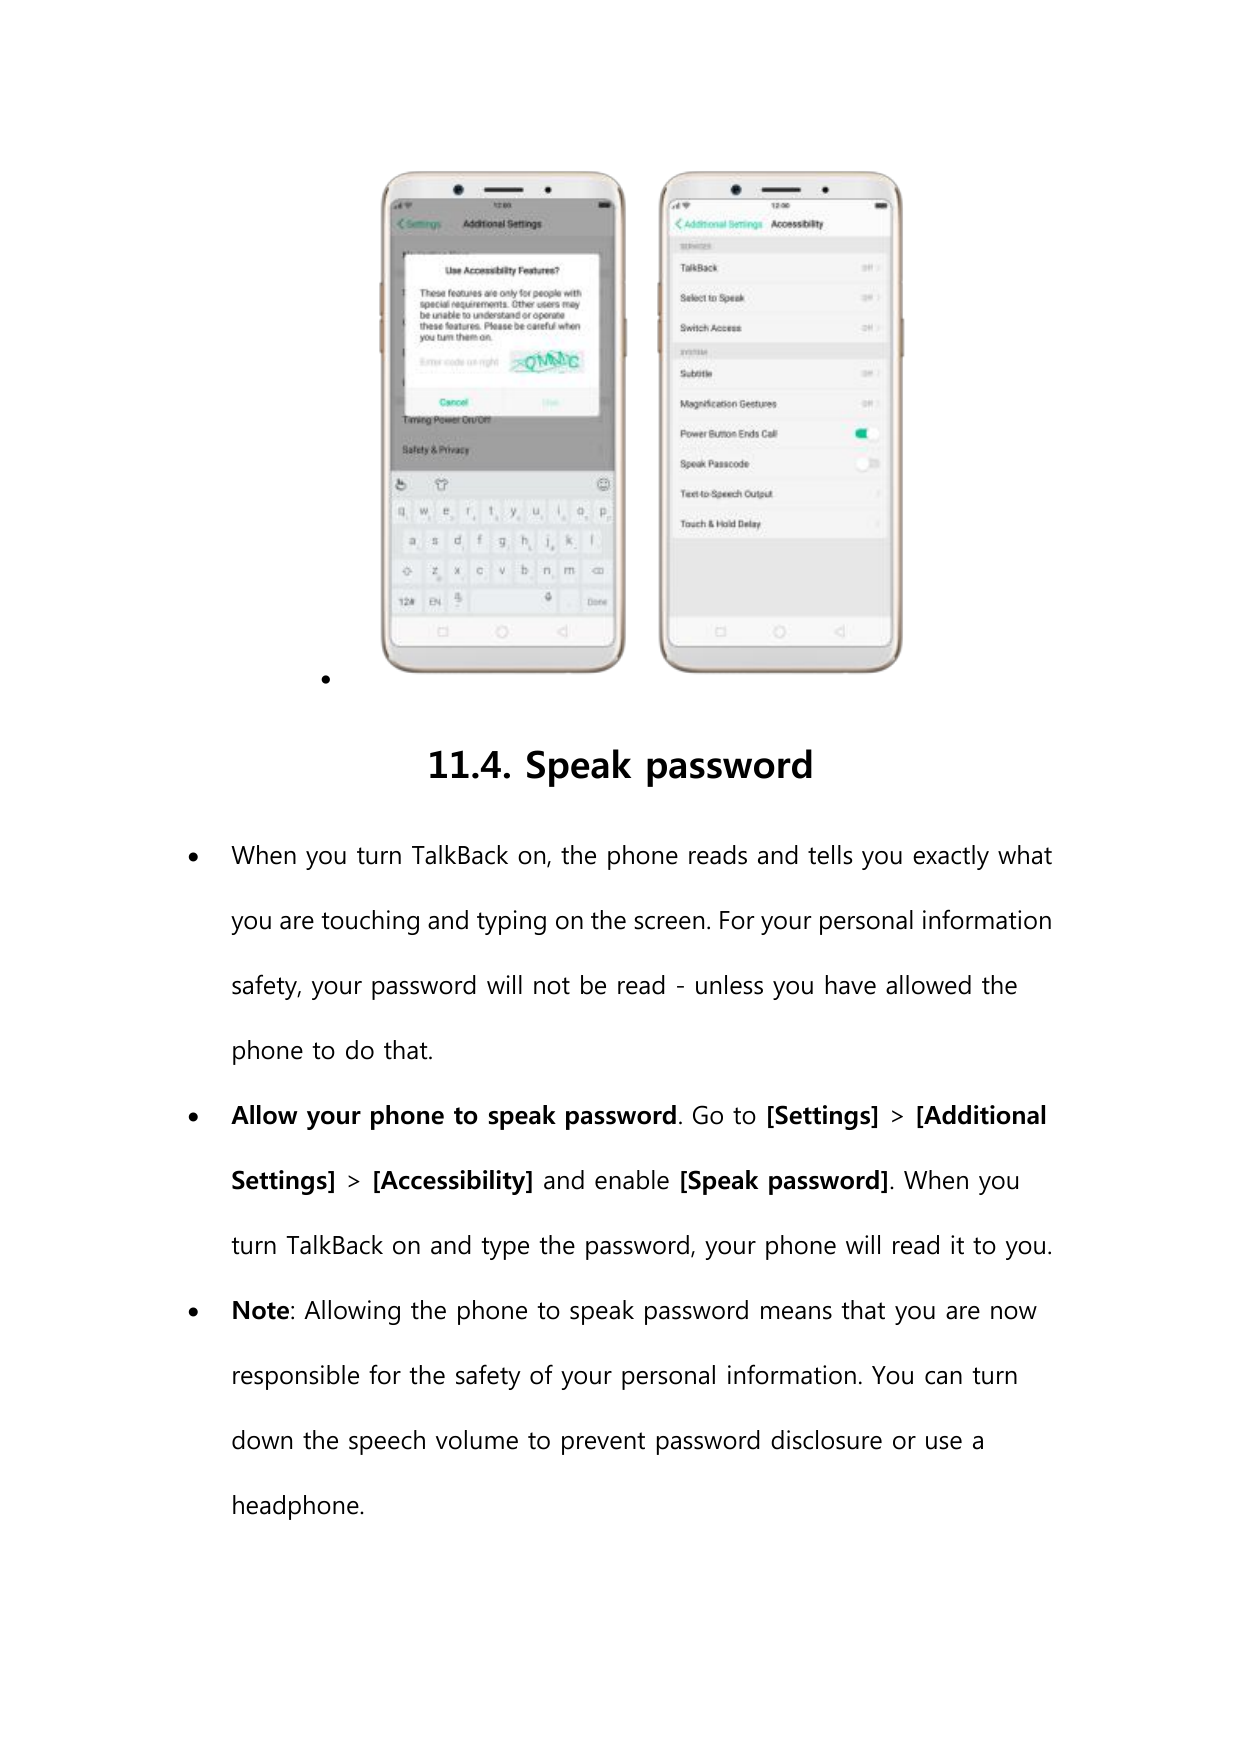 11.4. Speak passwordWhen you turn TalkBack on, the phone reads and tells you exactly whatyou are touching and typing on the sc